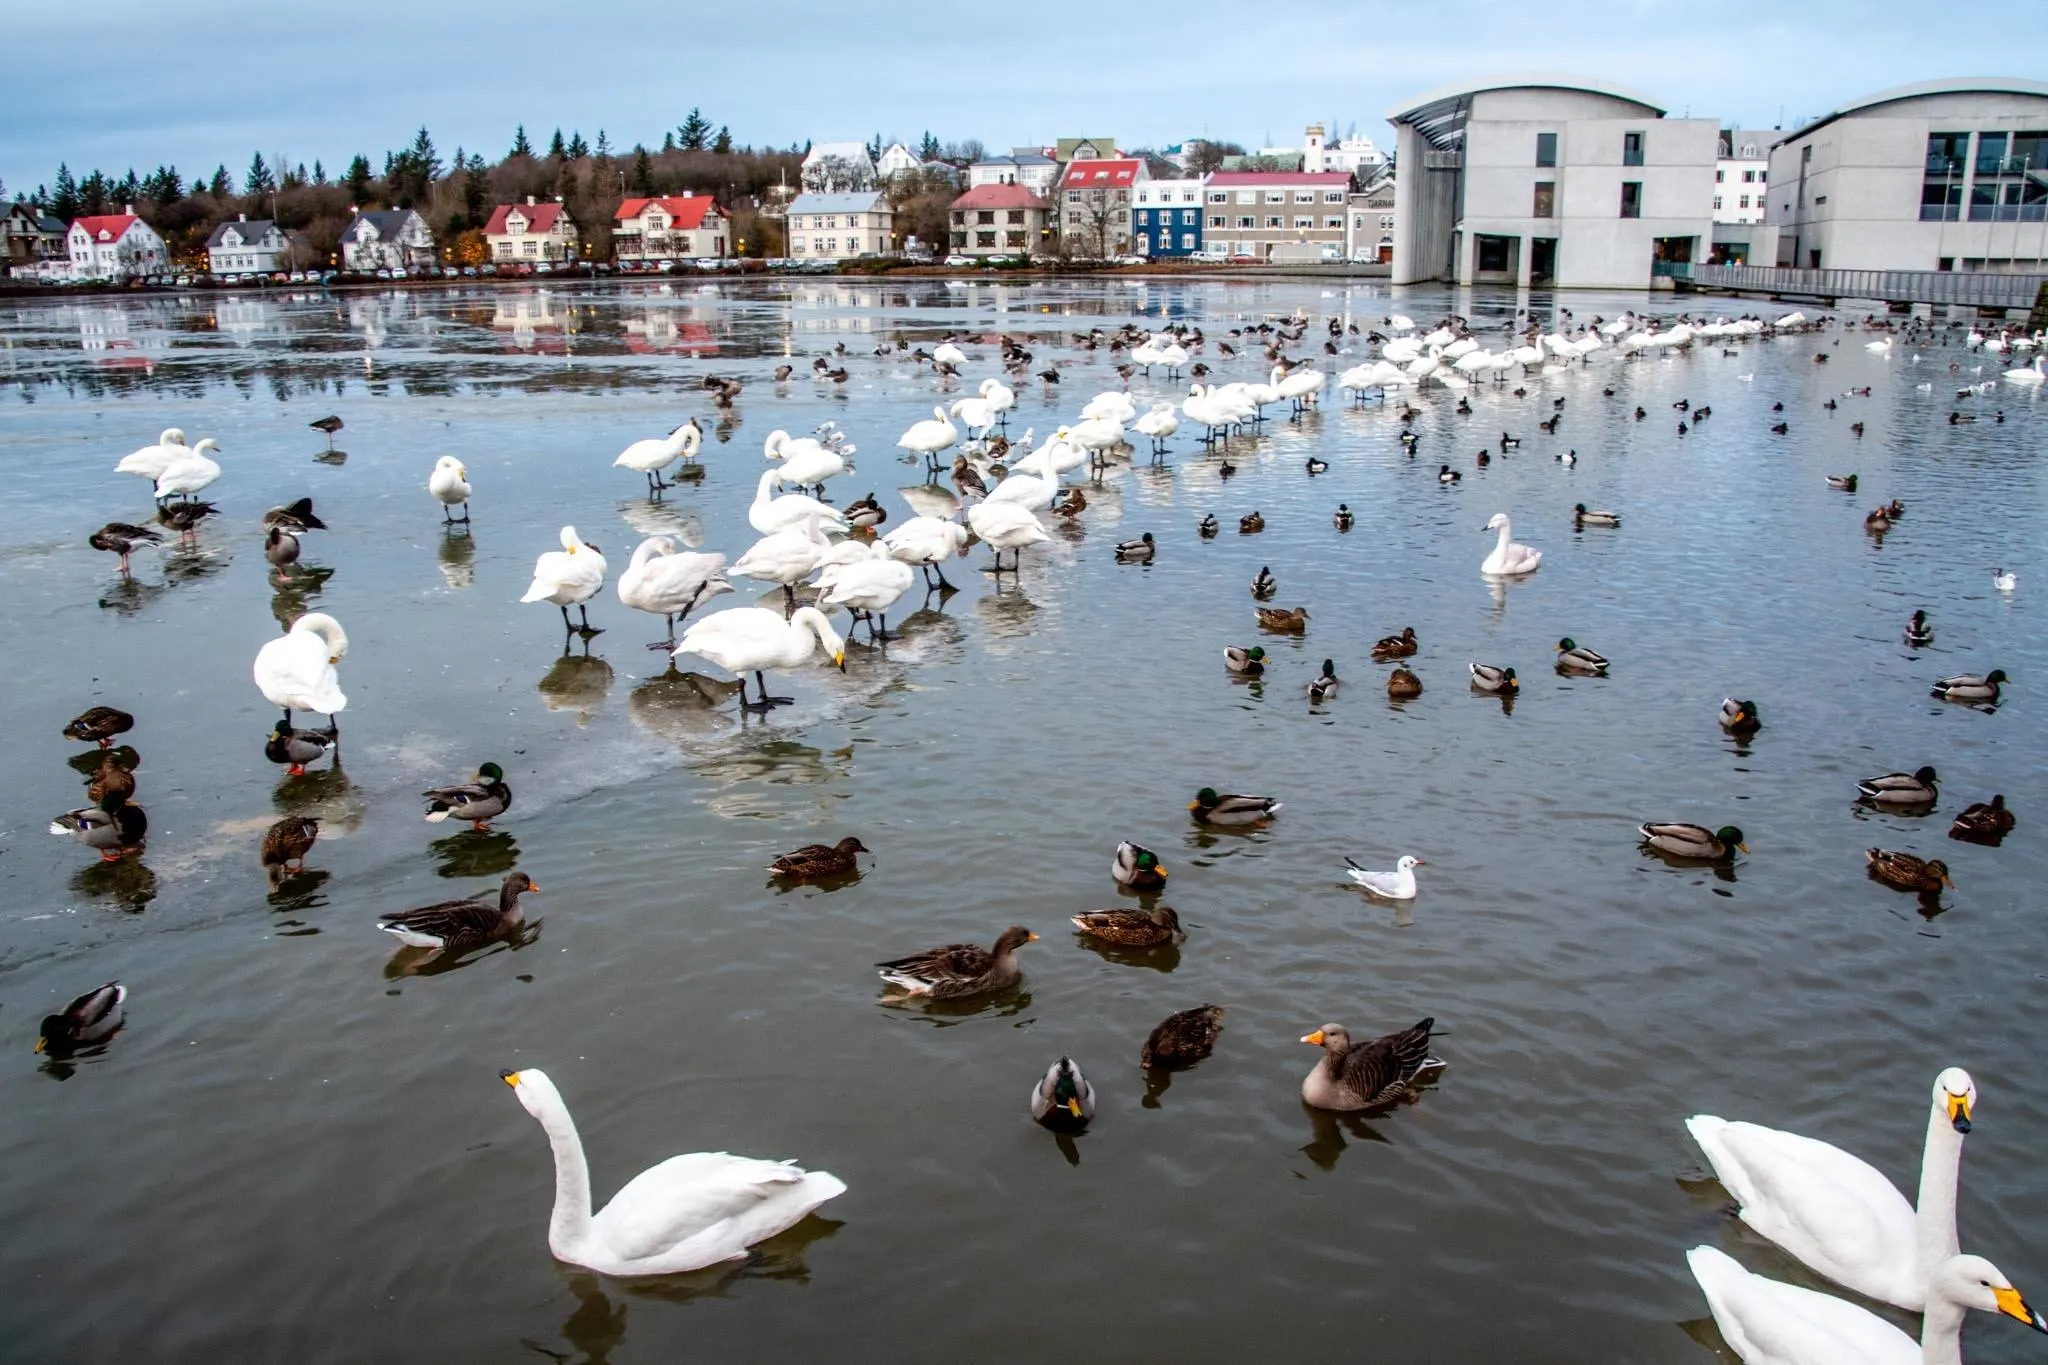 Ducks and swans in a pond in front of the Reykjavik City Hall.